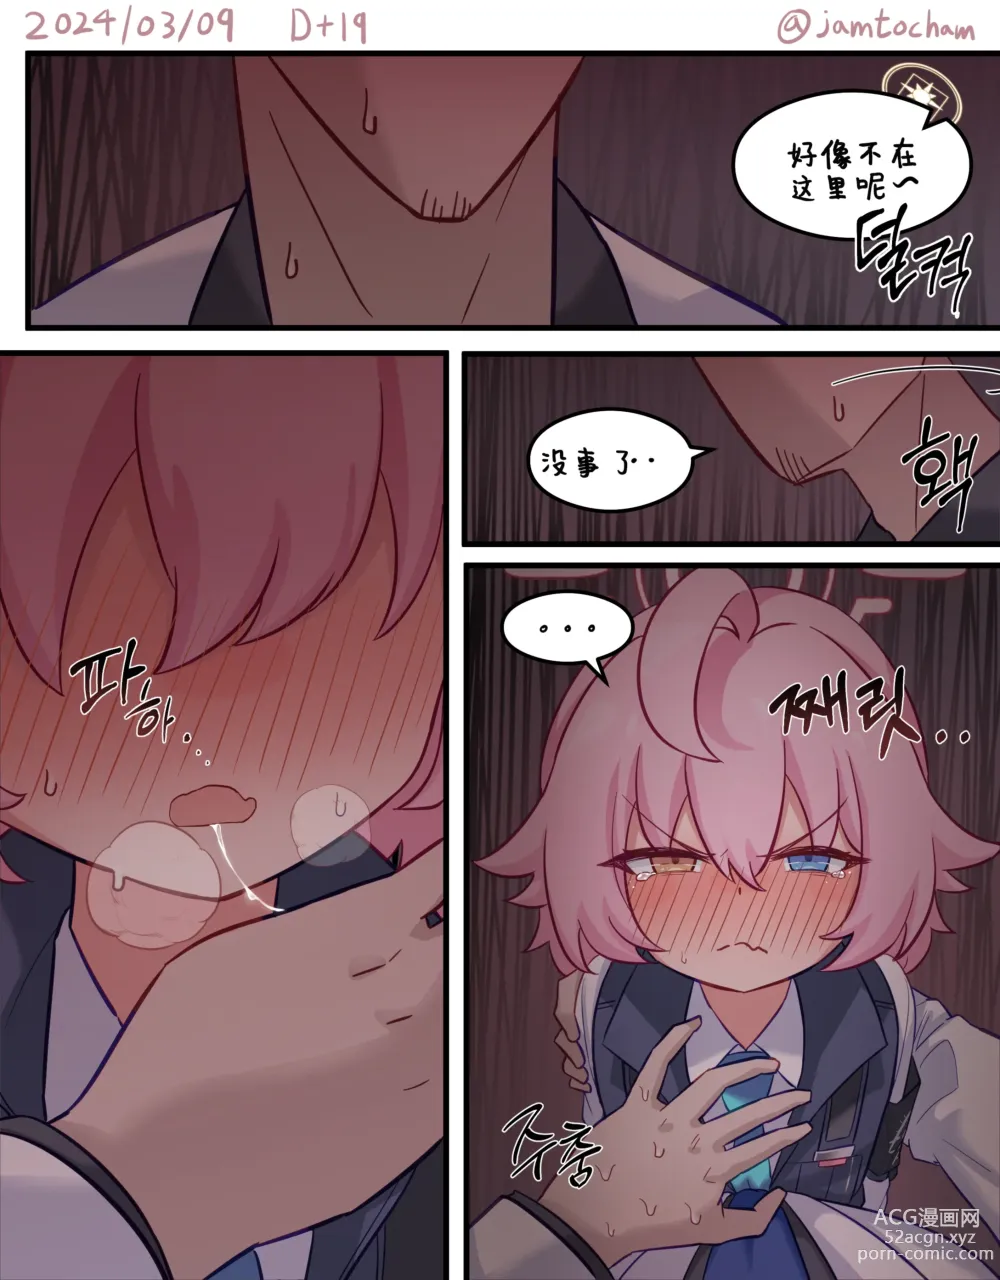 Page 9 of doujinshi 1일 1시노